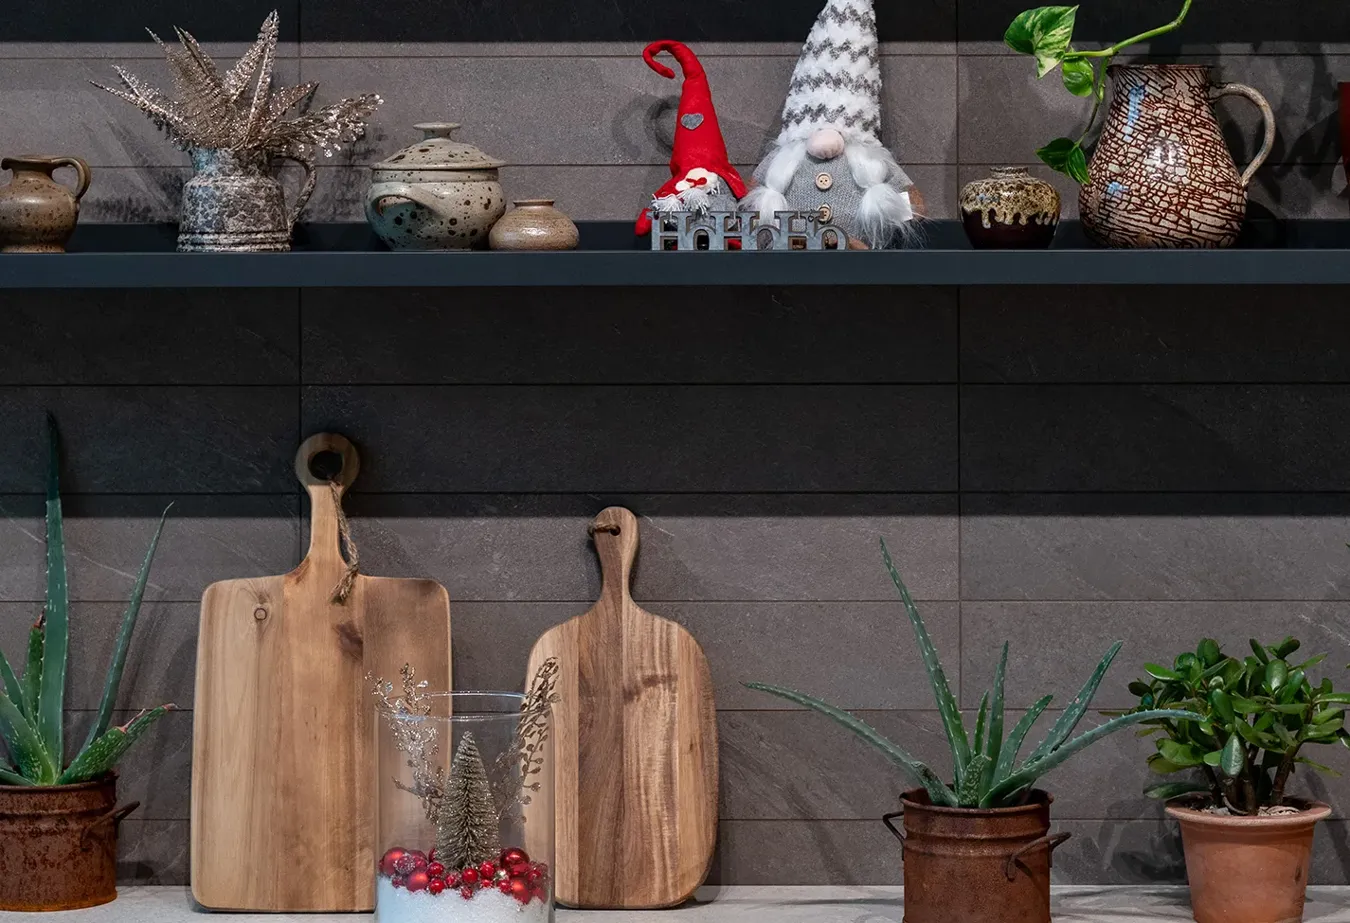 Cozy kitchen with grey porcelain tiles of Brystone collection, traditional Christmas decorations, and natural wood accessories.